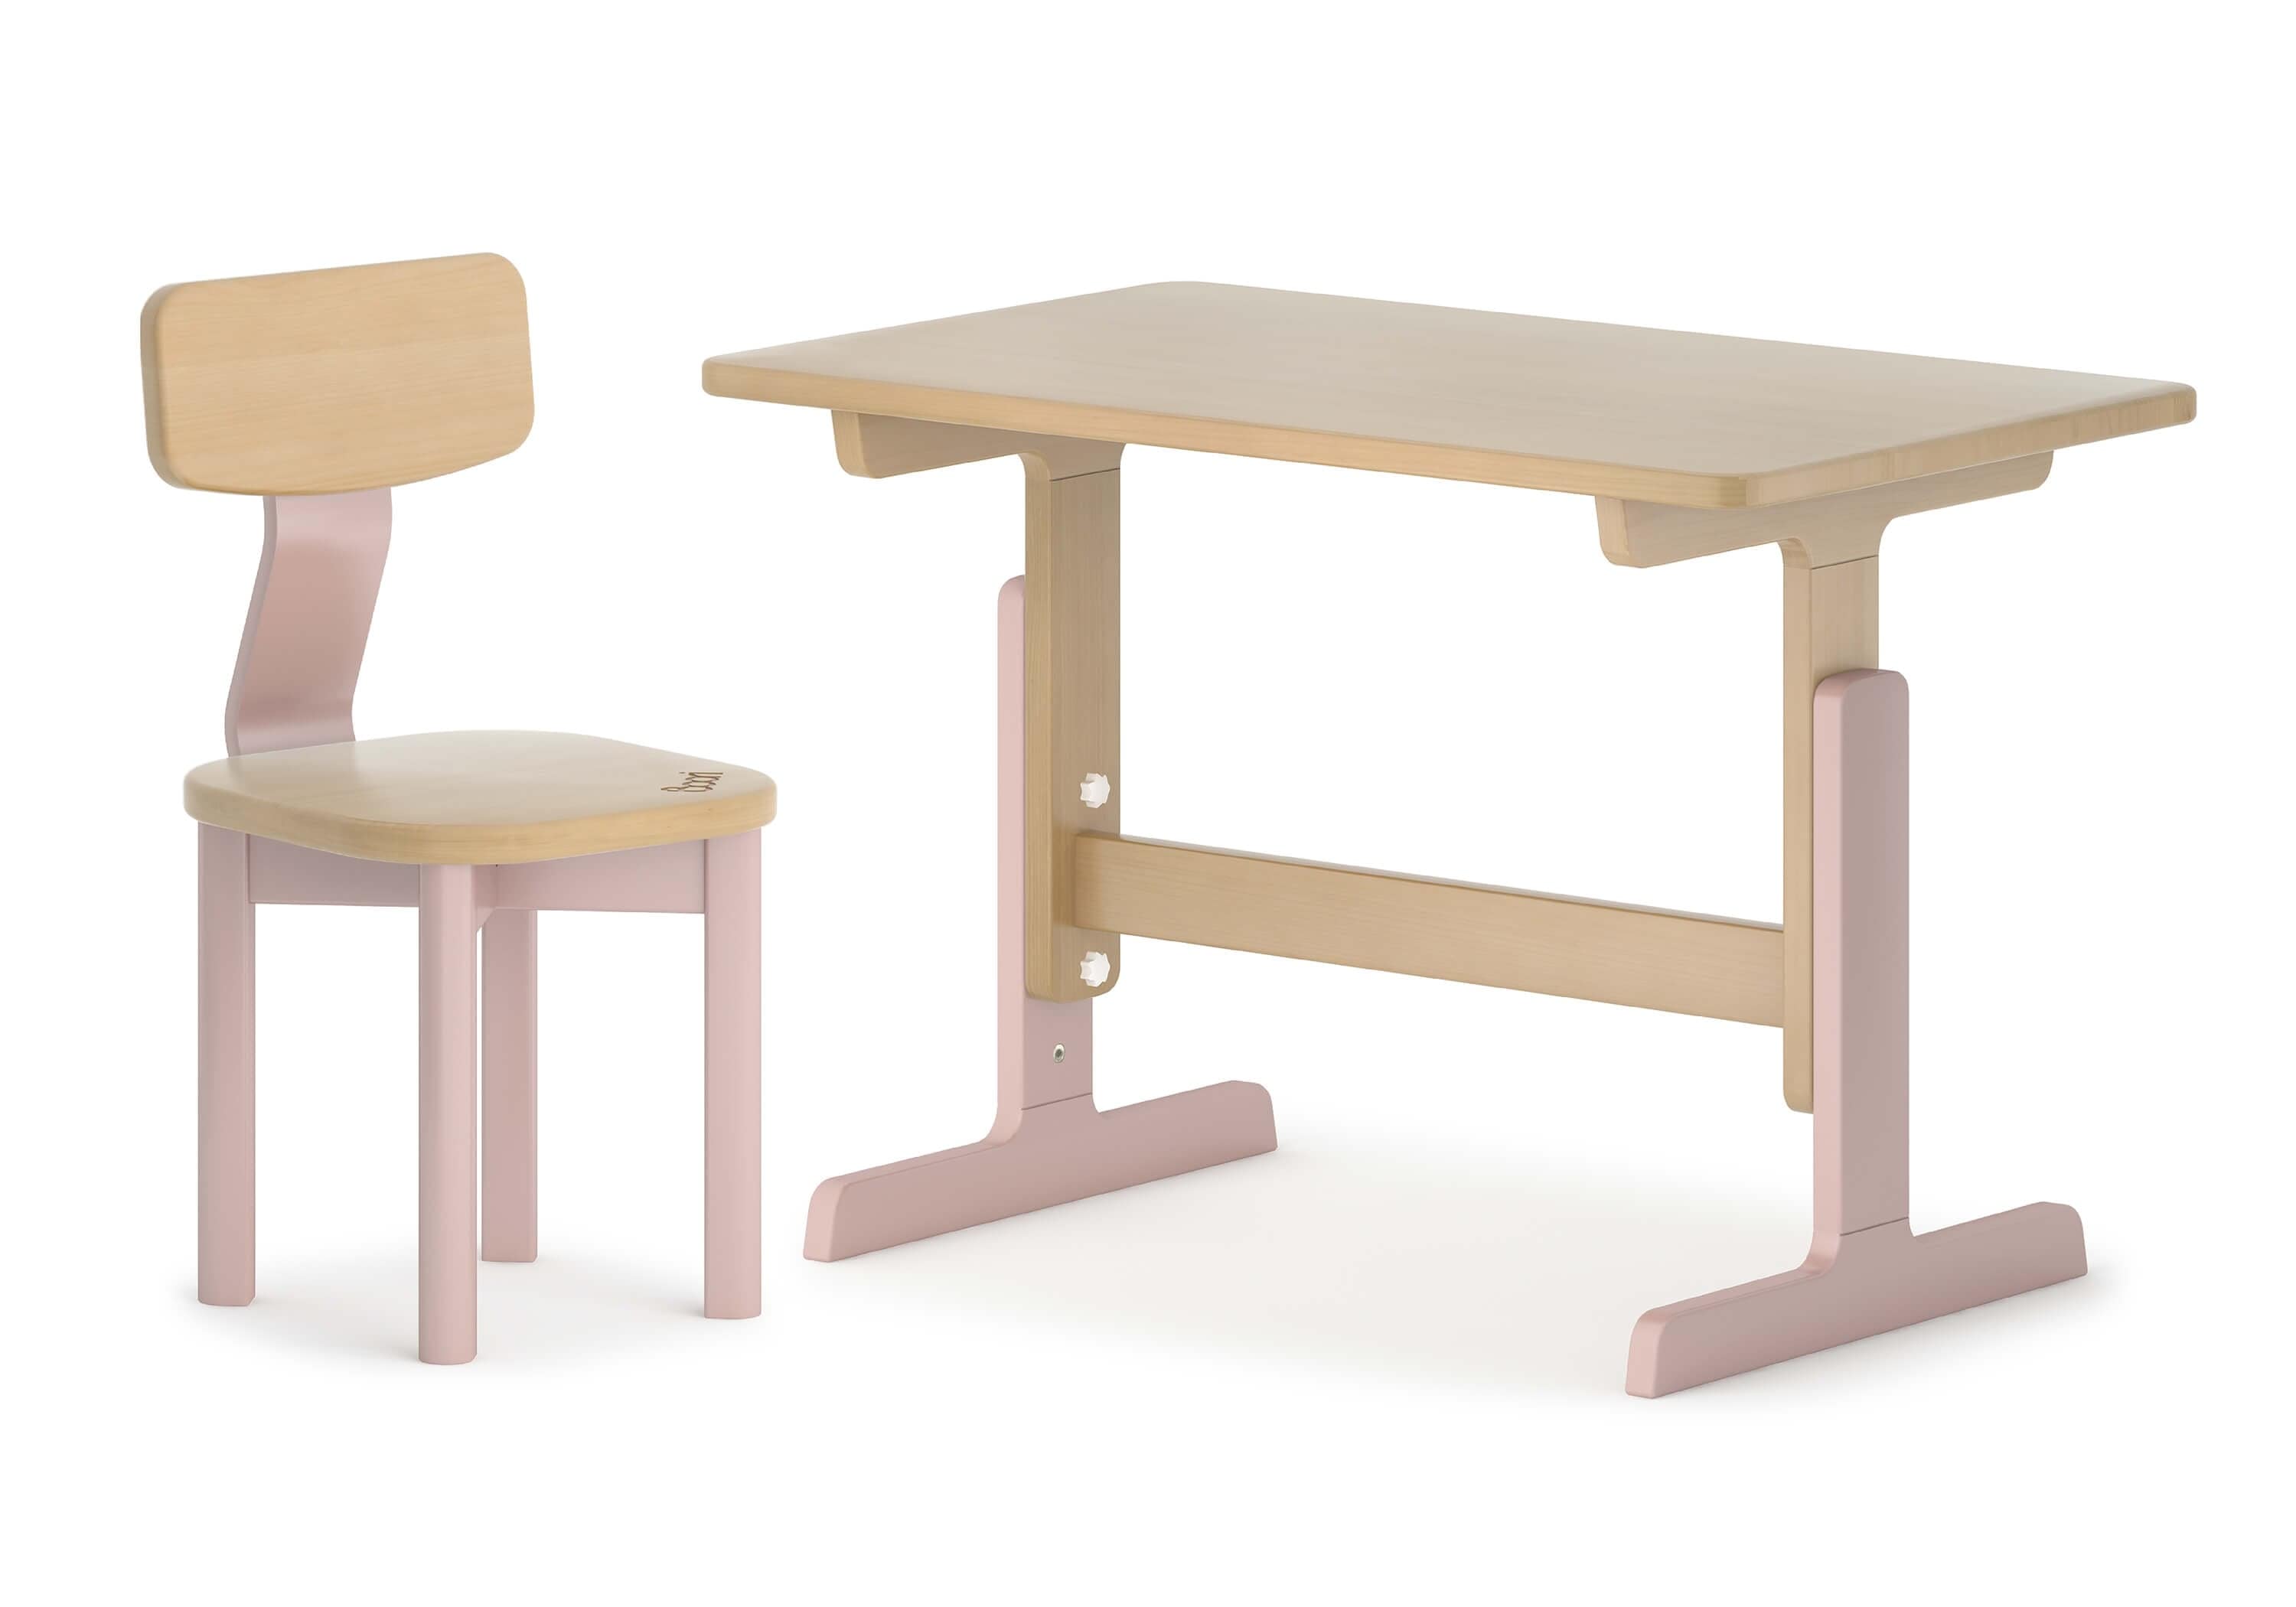 Boori Table & Chairs Cherry & Almond - Pre Order Boori Tidy Learning Table & Chair Bundle - Direct Delivery